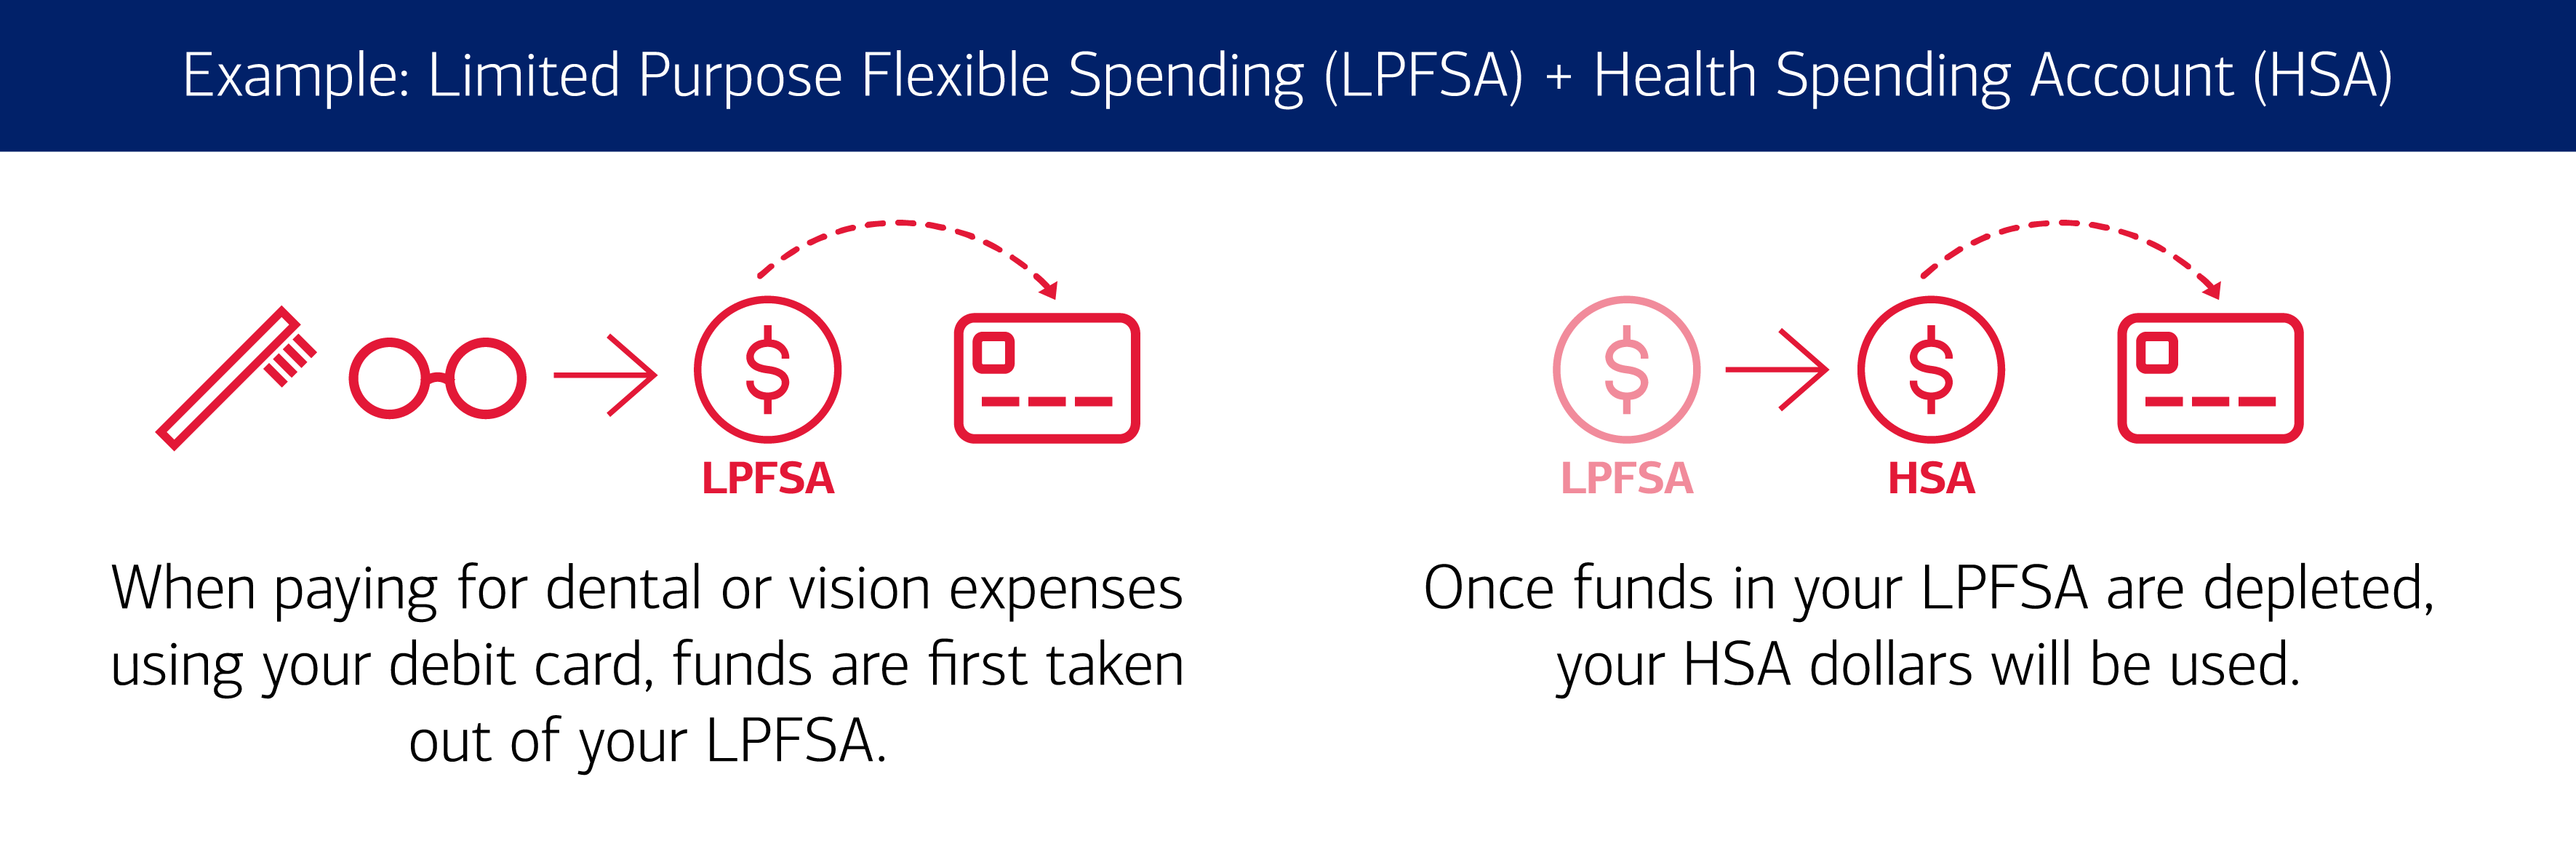 Graphic illustrates that when you have a Limited Purpose Flexible Spending Account (LPFSA) and a Health Spending Account (HSA) and are paying for dental or vision expenses with your debit card, funds are first taken out of your LPFSA. Once funds in your LPFSA are depleted, your HSA dollars will be used. 